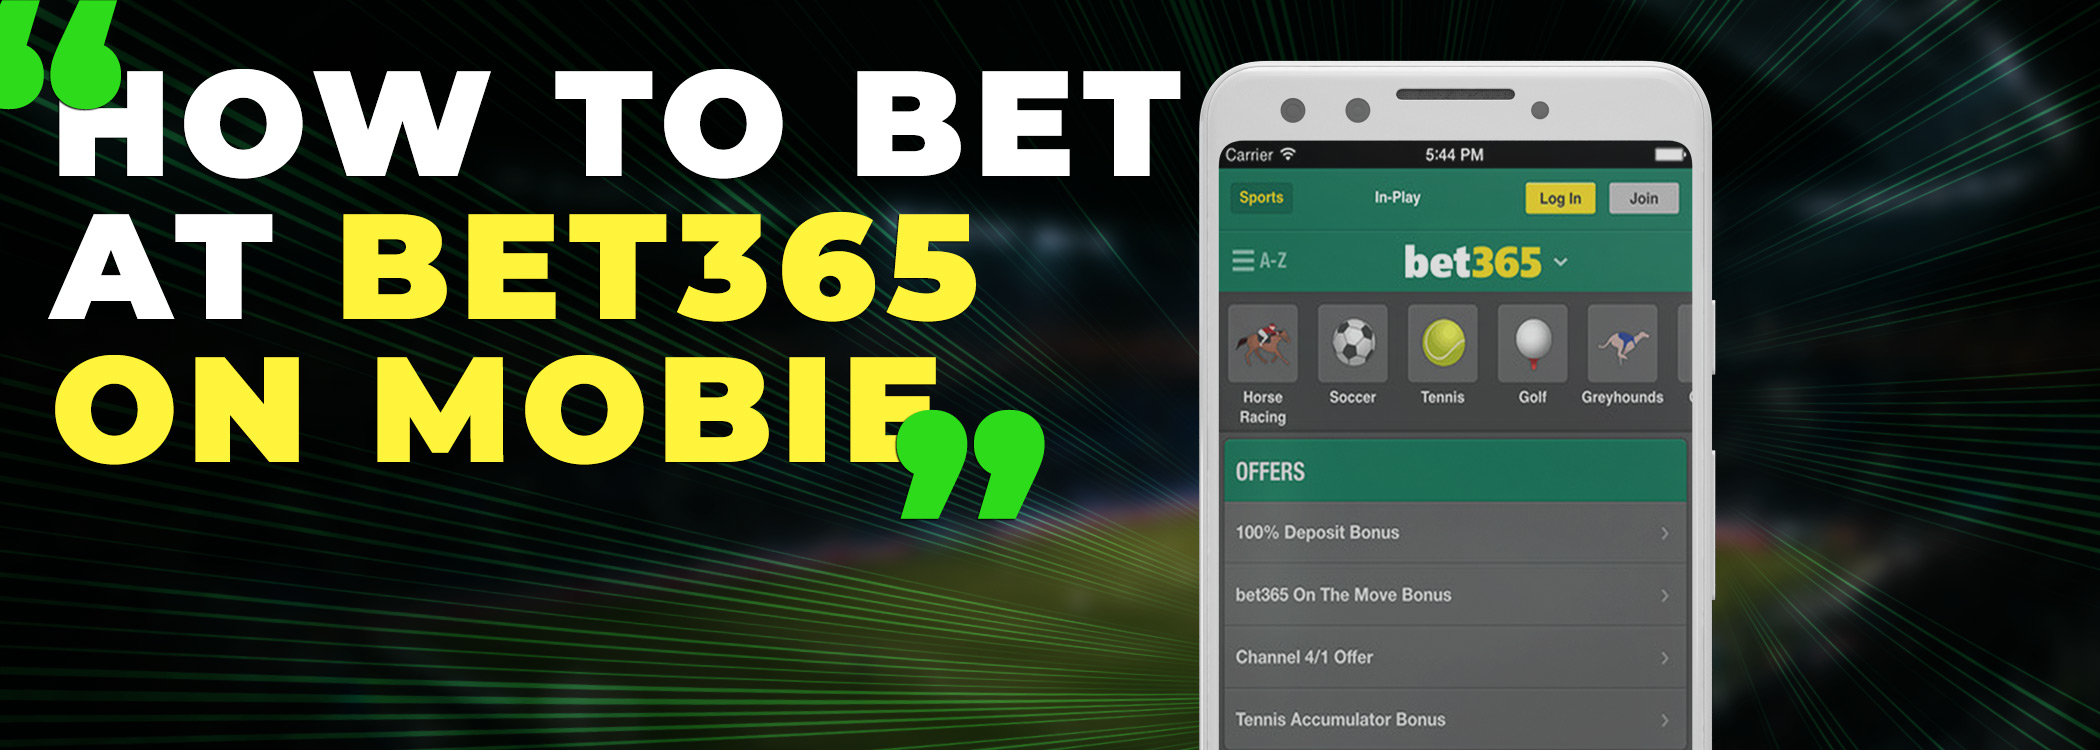 A clear guide for mobile betting at bet365.